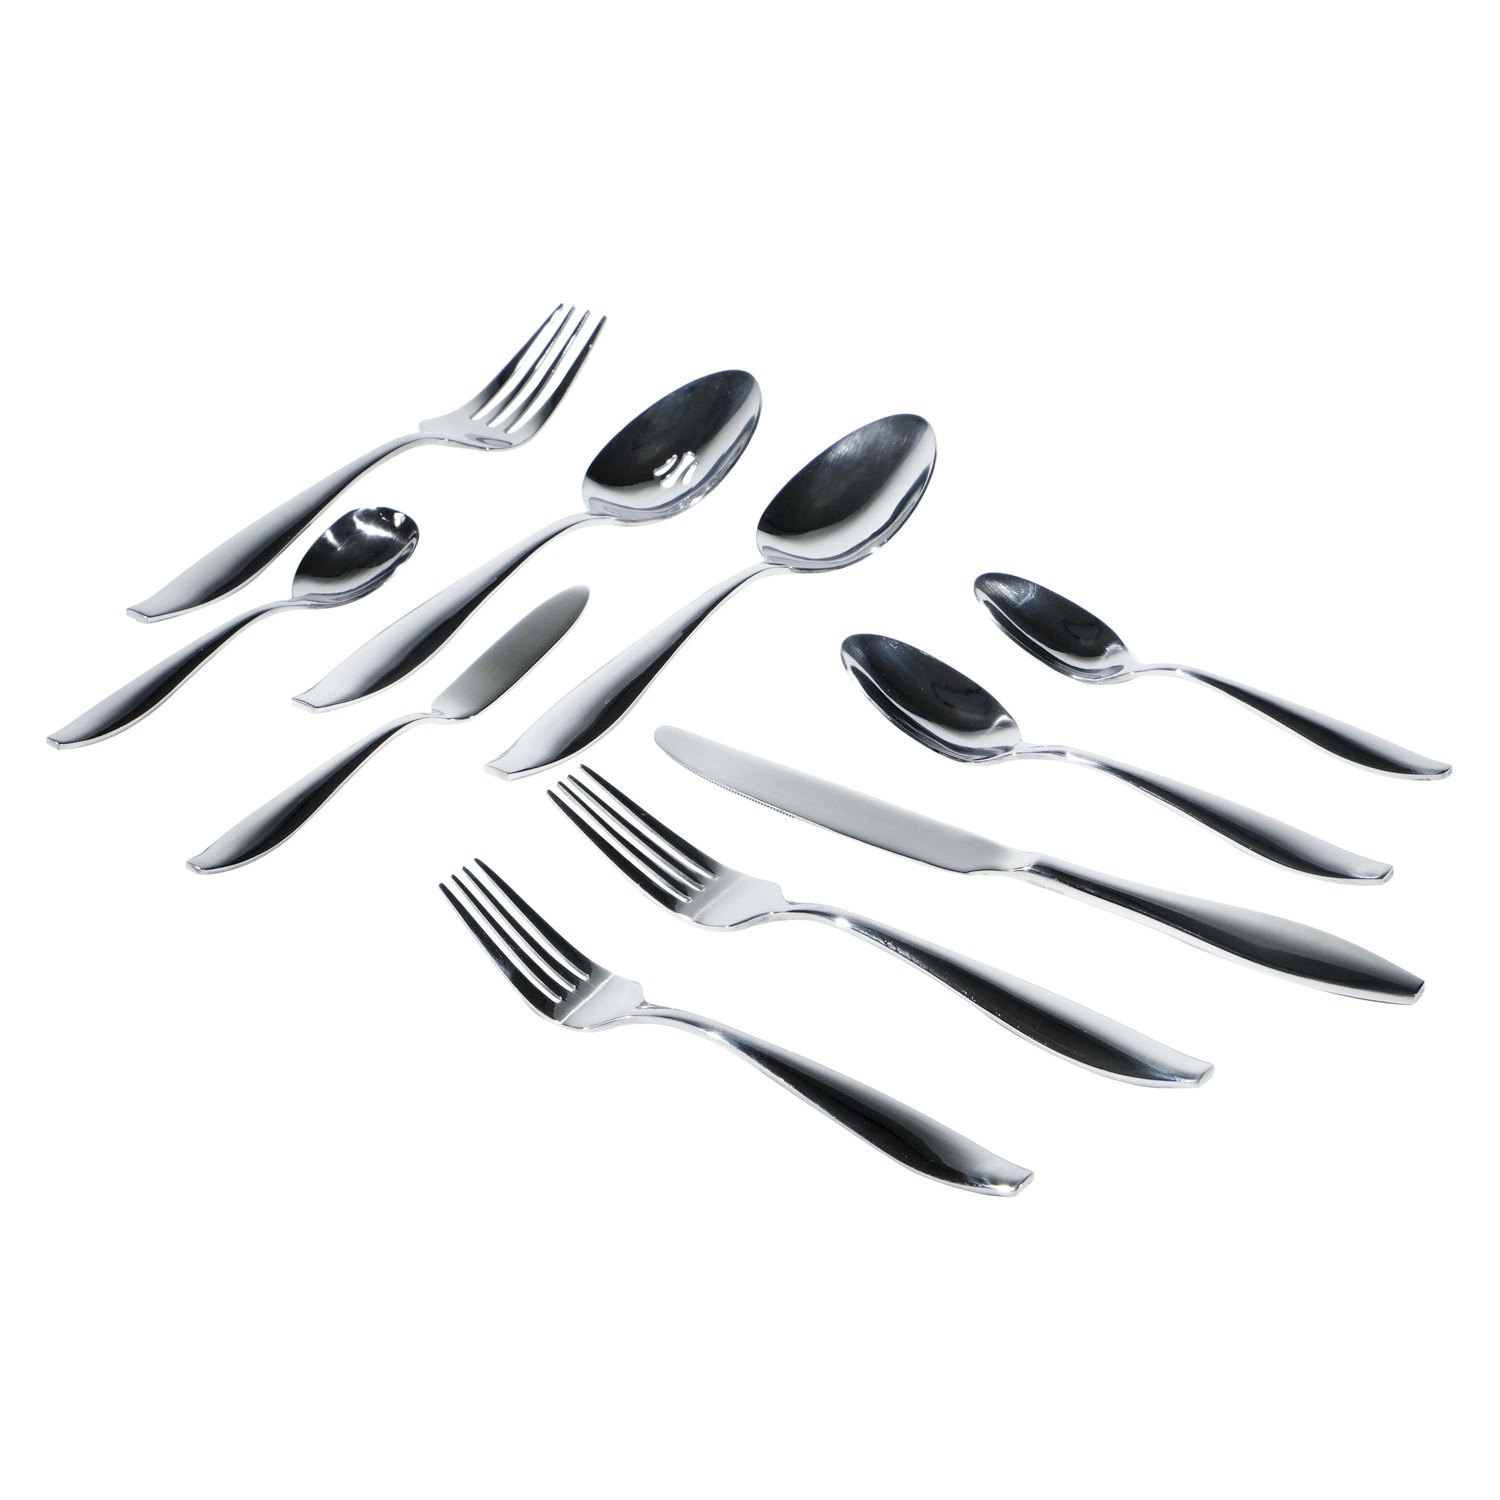 High Quality Stainless Steel Spoon Fork Knife, Cutlery Set